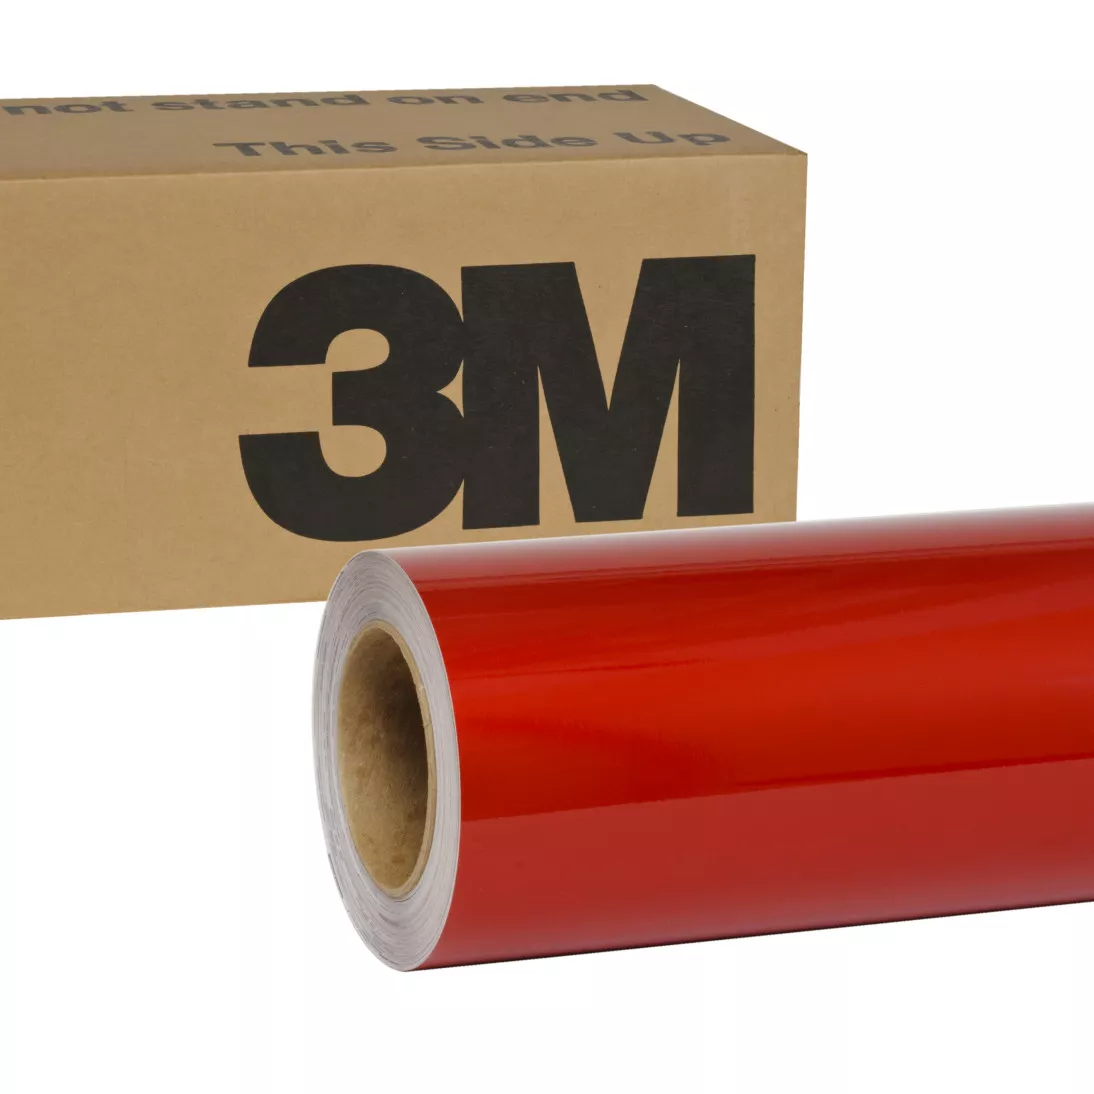 3M™ Wrap Film Series 1080-G363, Gloss Dragon Fire Red, 60 in x 5 yd